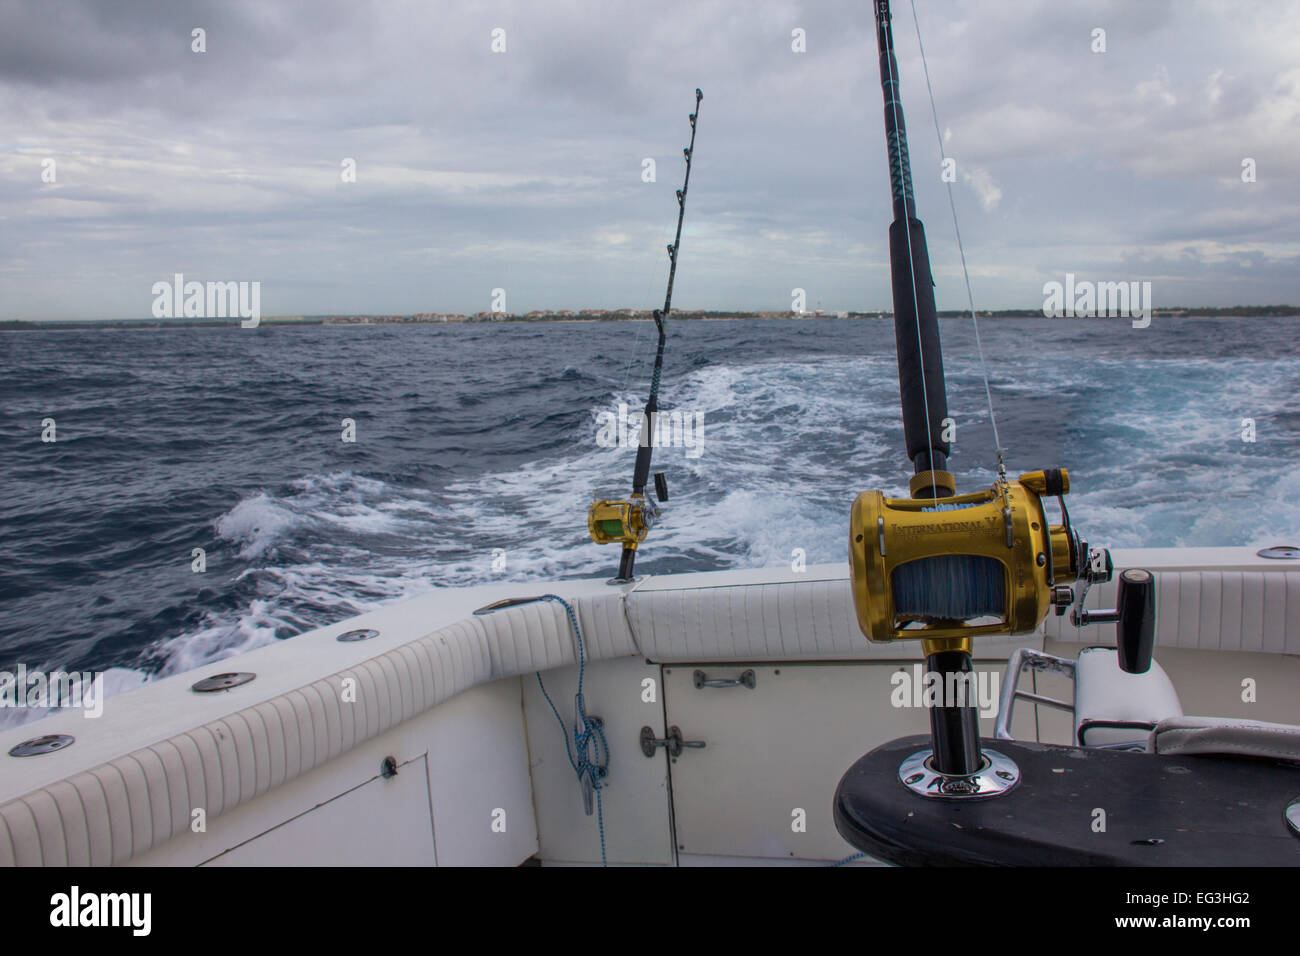 Two fishing rods with levelwind reels sit ready for action on a Caribbean fishing trip. Stock Photo